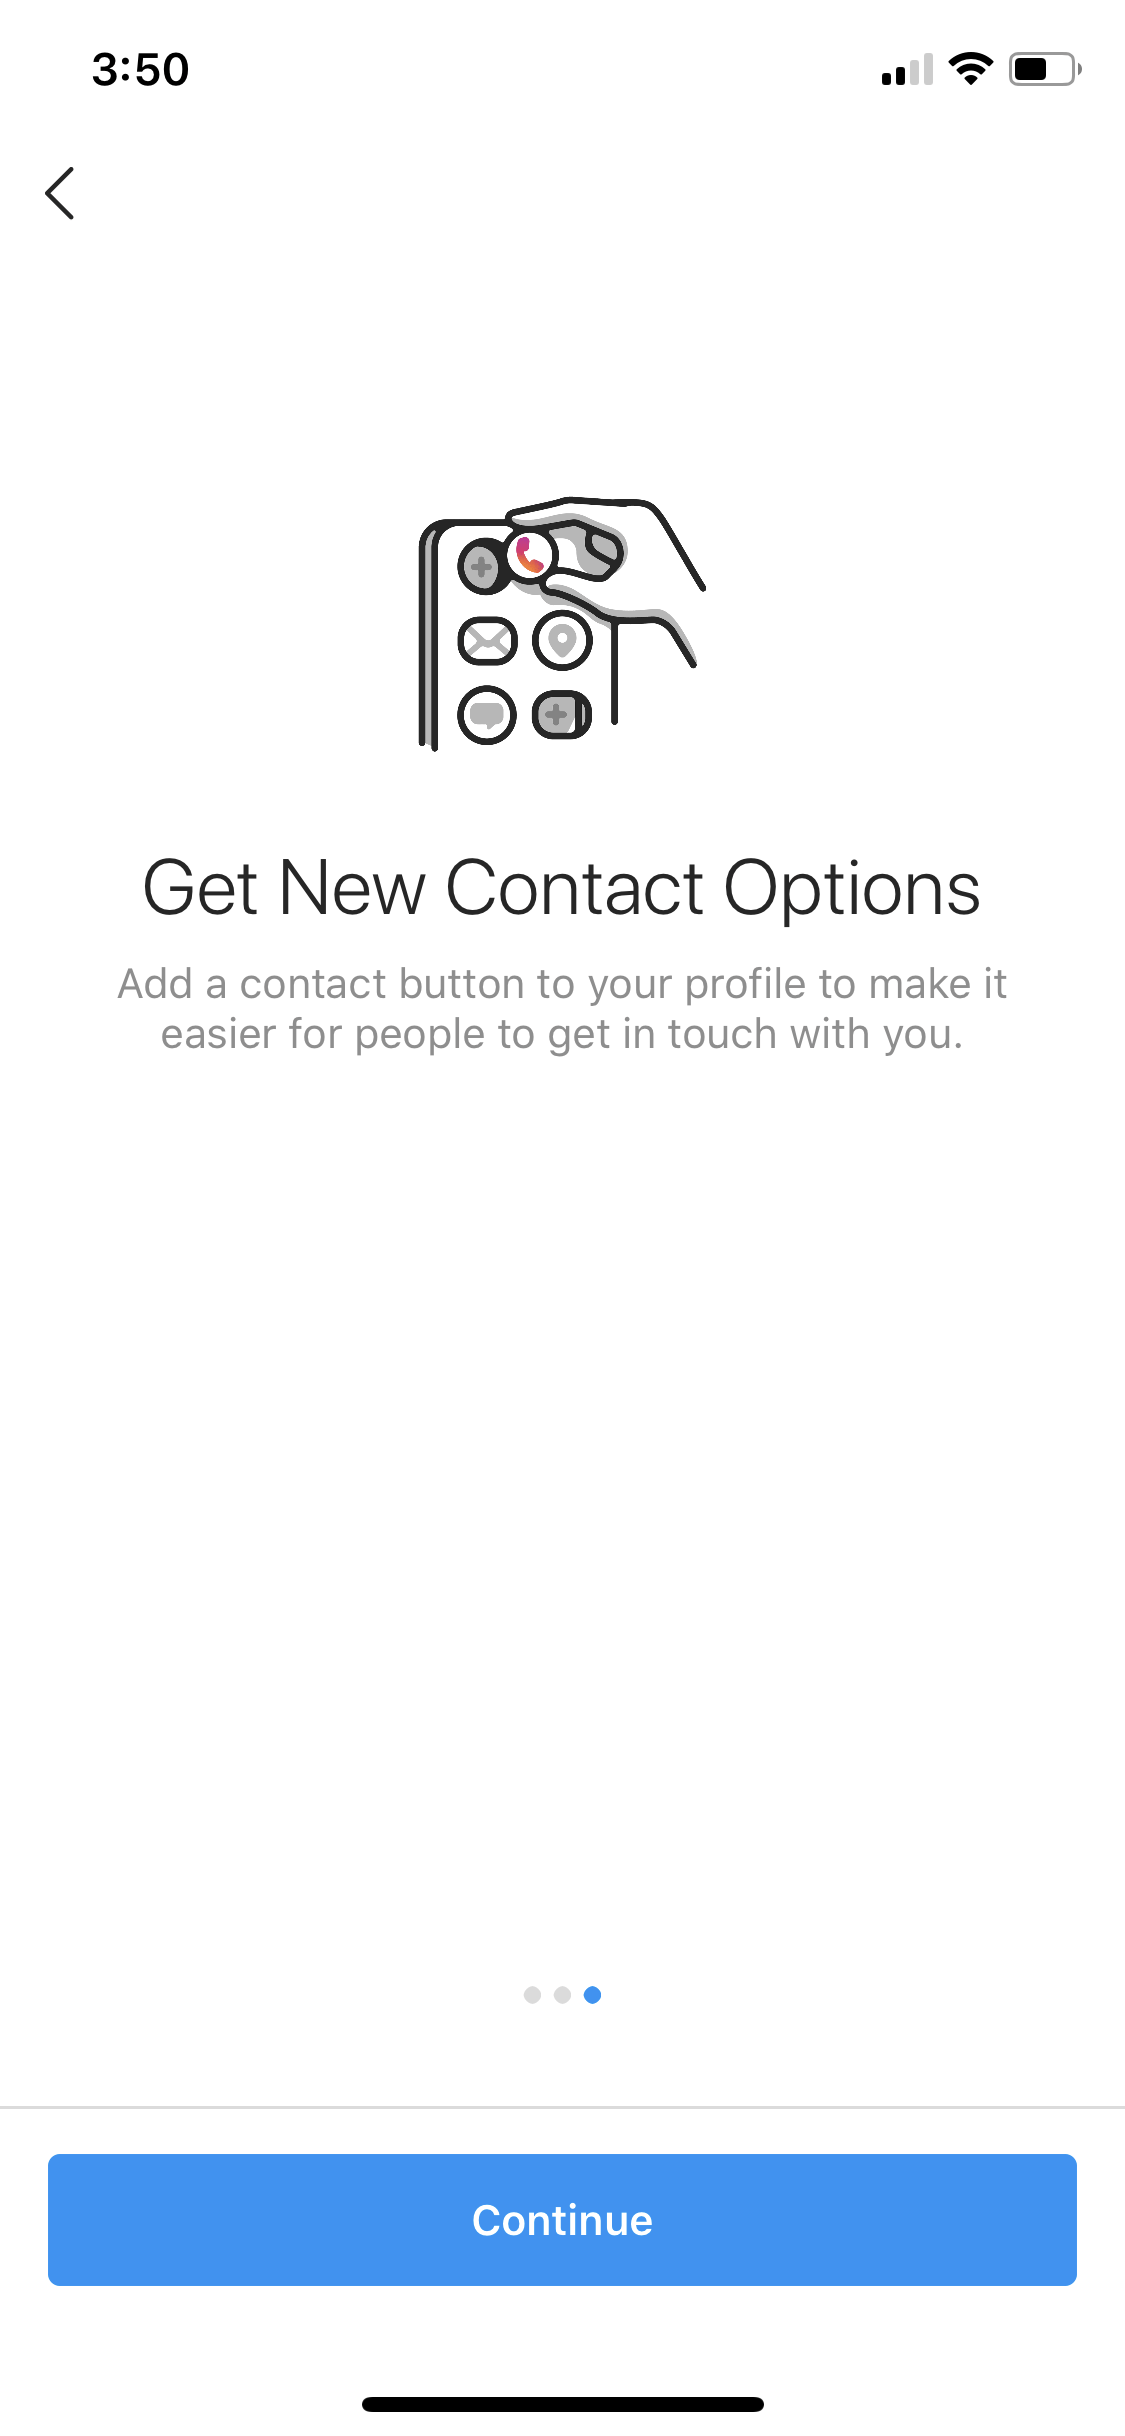 Get New Contact Options